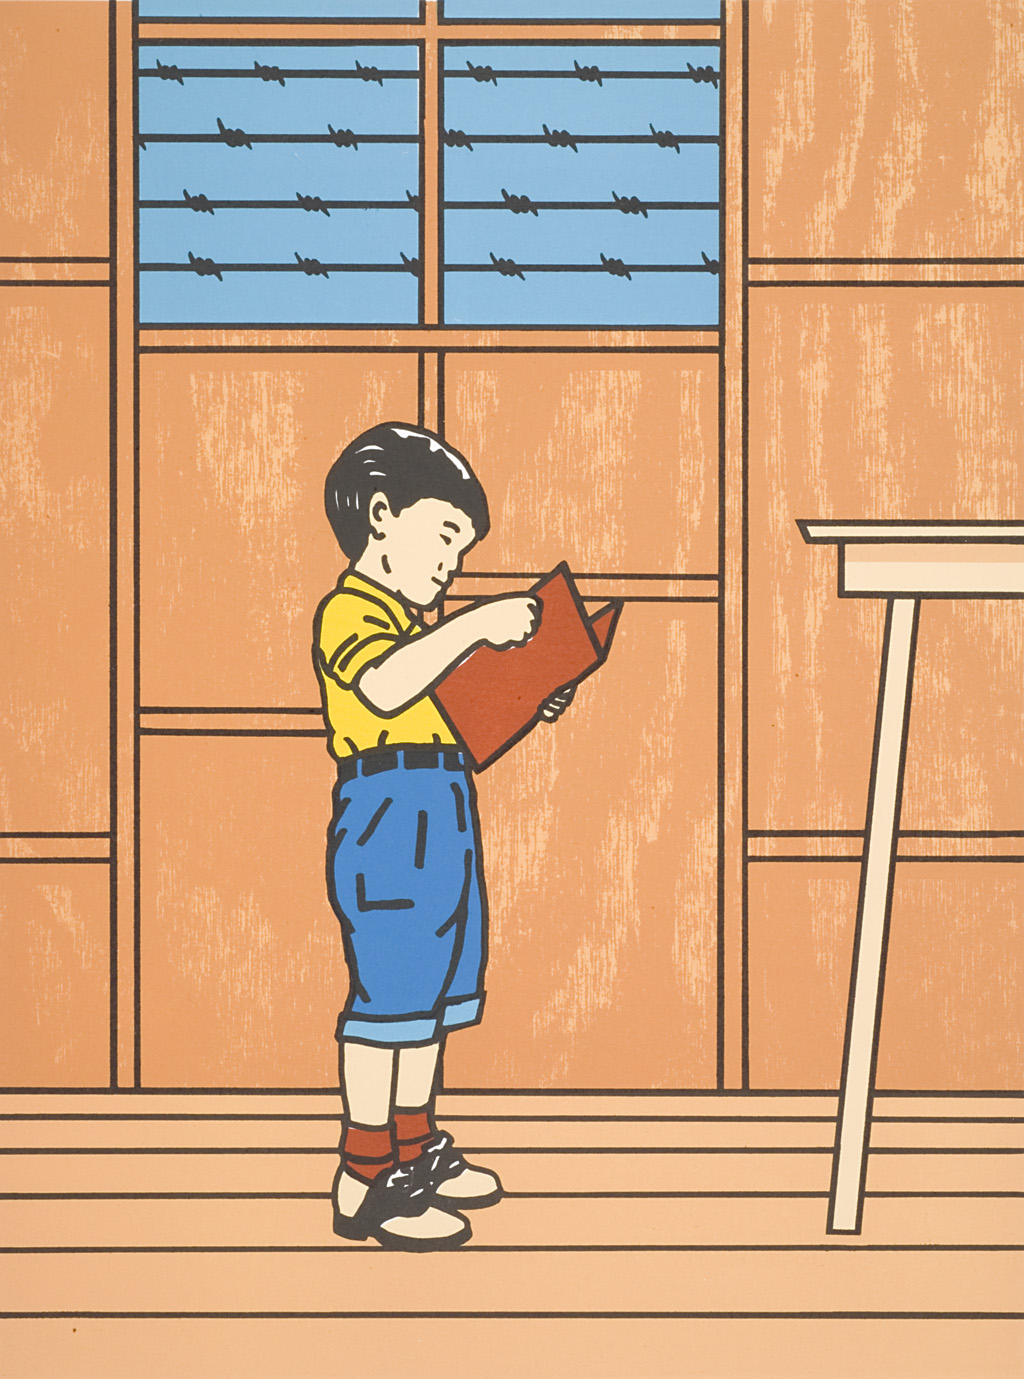 A child with dark hair, a yellow short and blue shorts stands in the center of a room and reads a red book. He faces a table in the room.  Above him is a window, outside of which barbed wire can be seen.